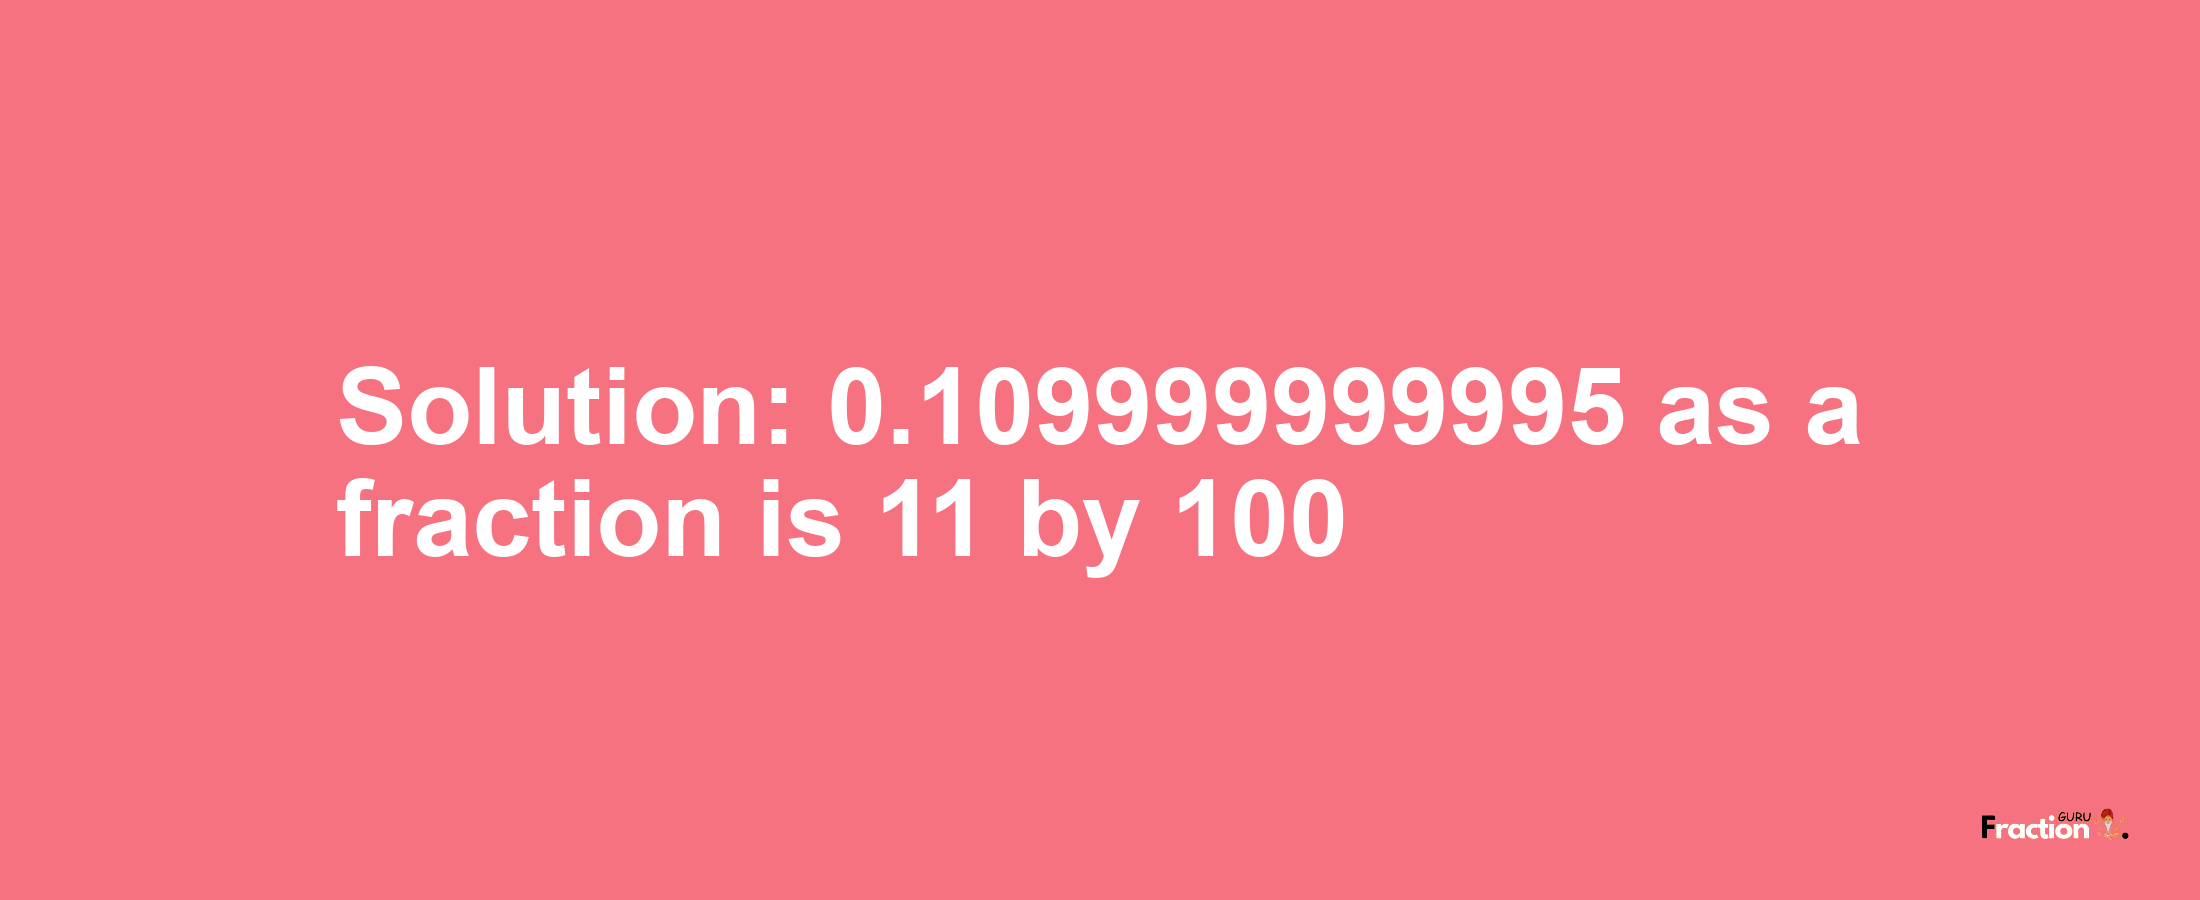 Solution:0.109999999995 as a fraction is 11/100